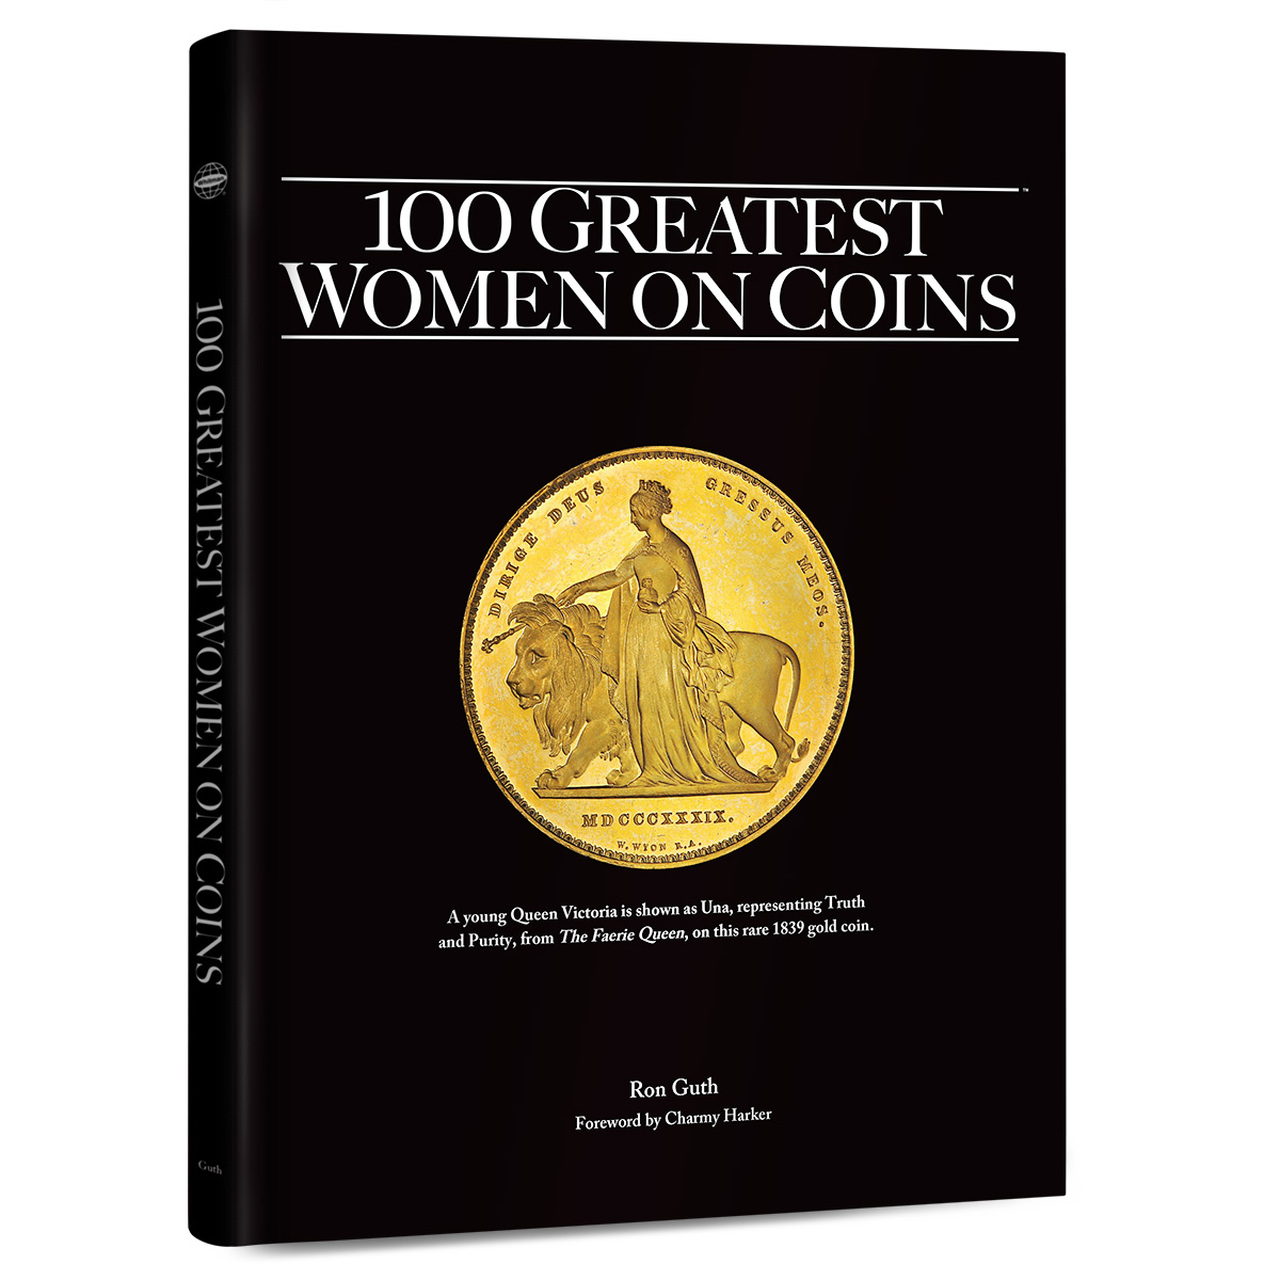 100 Greates Women on Coins by Ron Guth Foreward by Charmy Harker